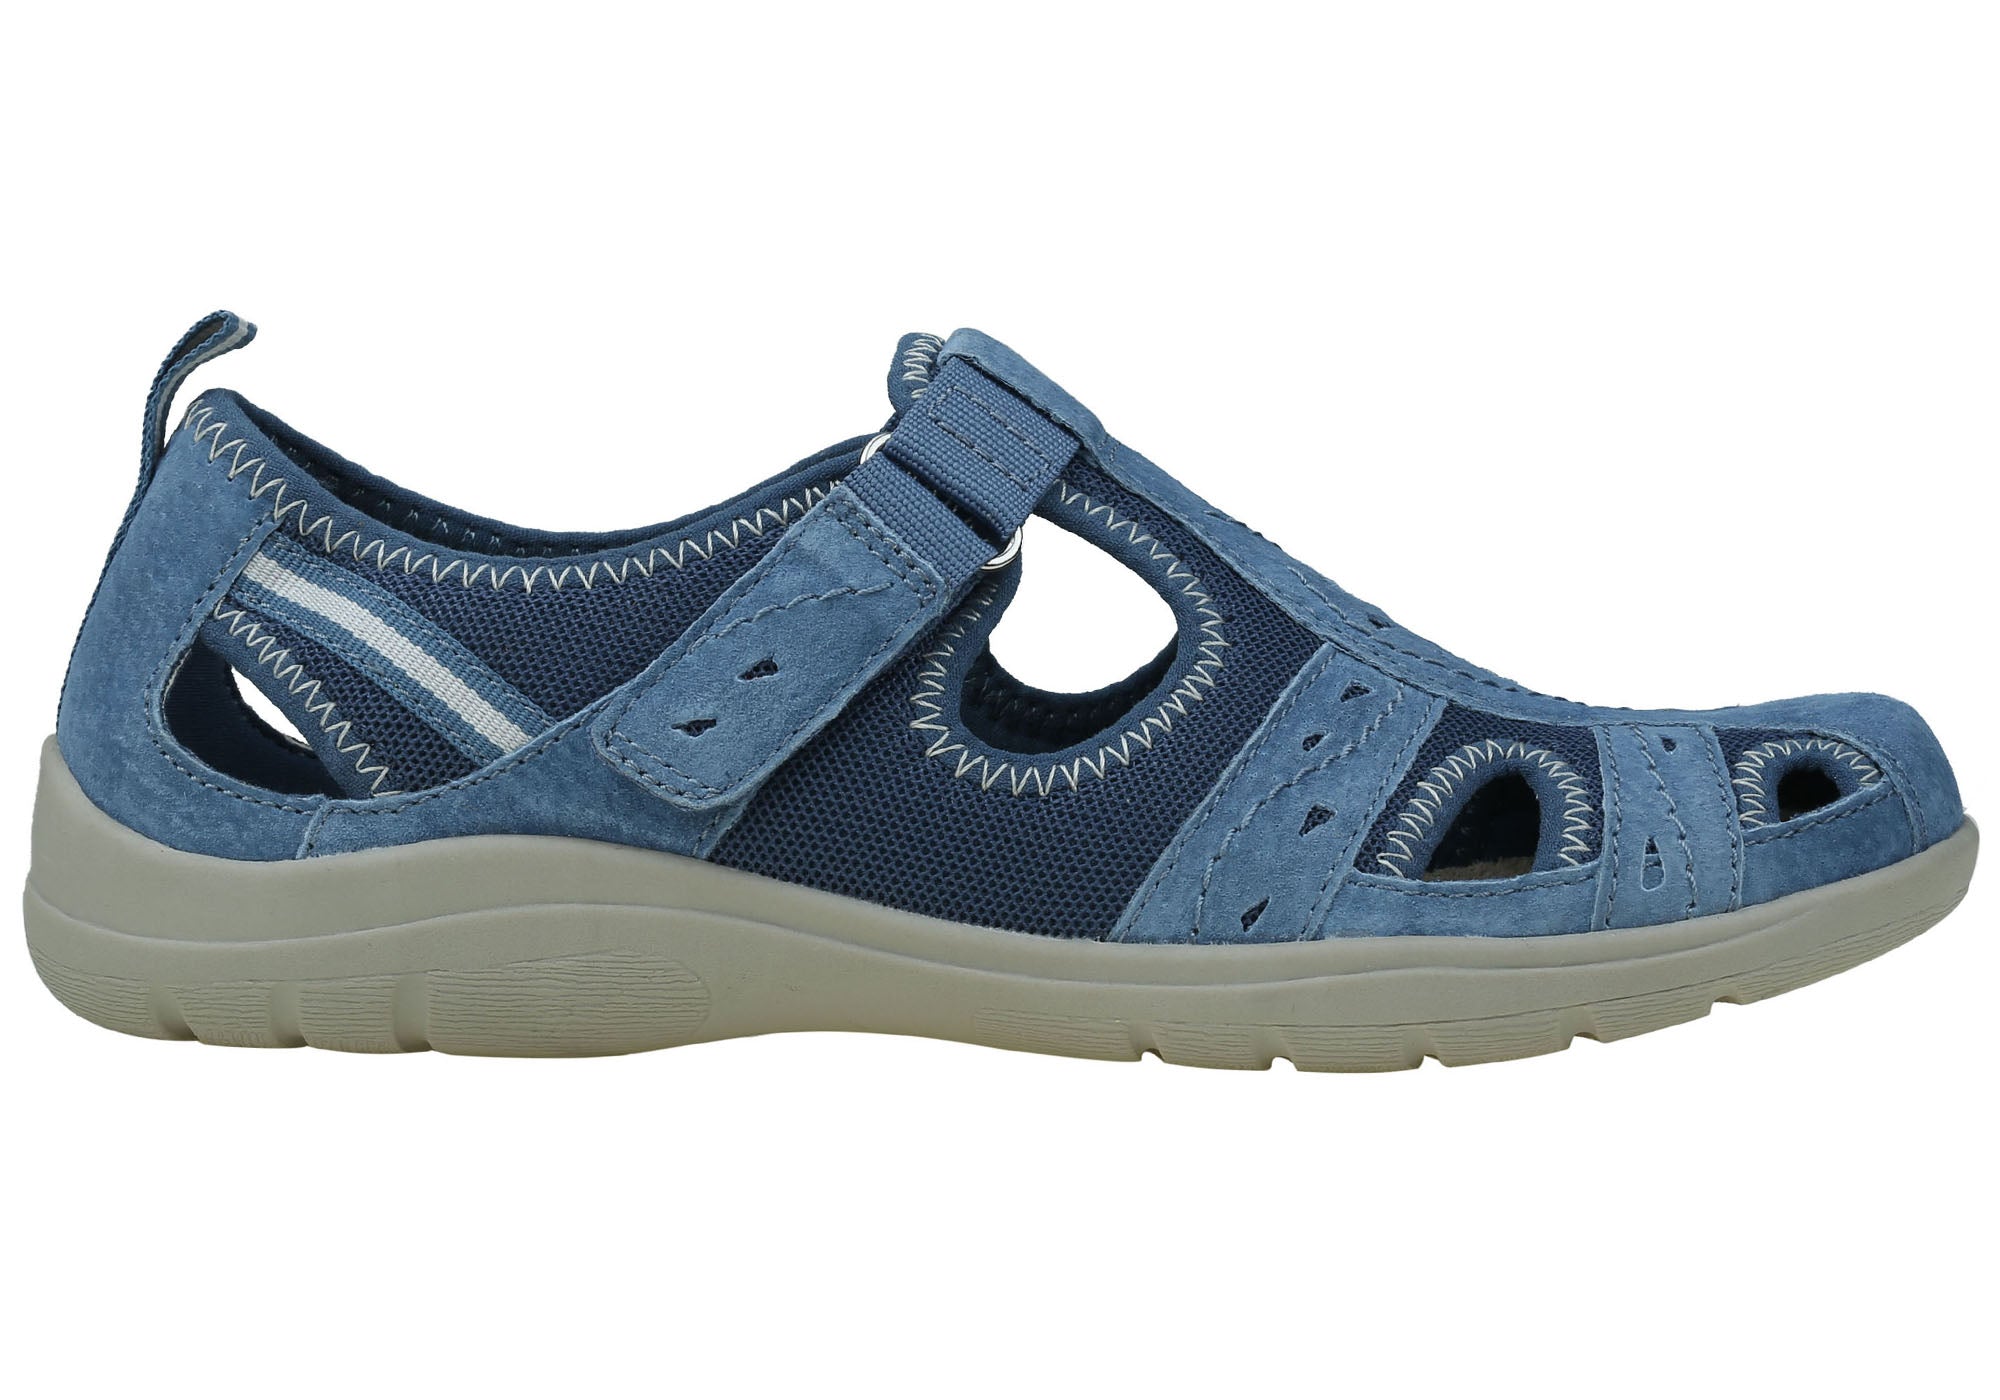 casual shoes with arch support